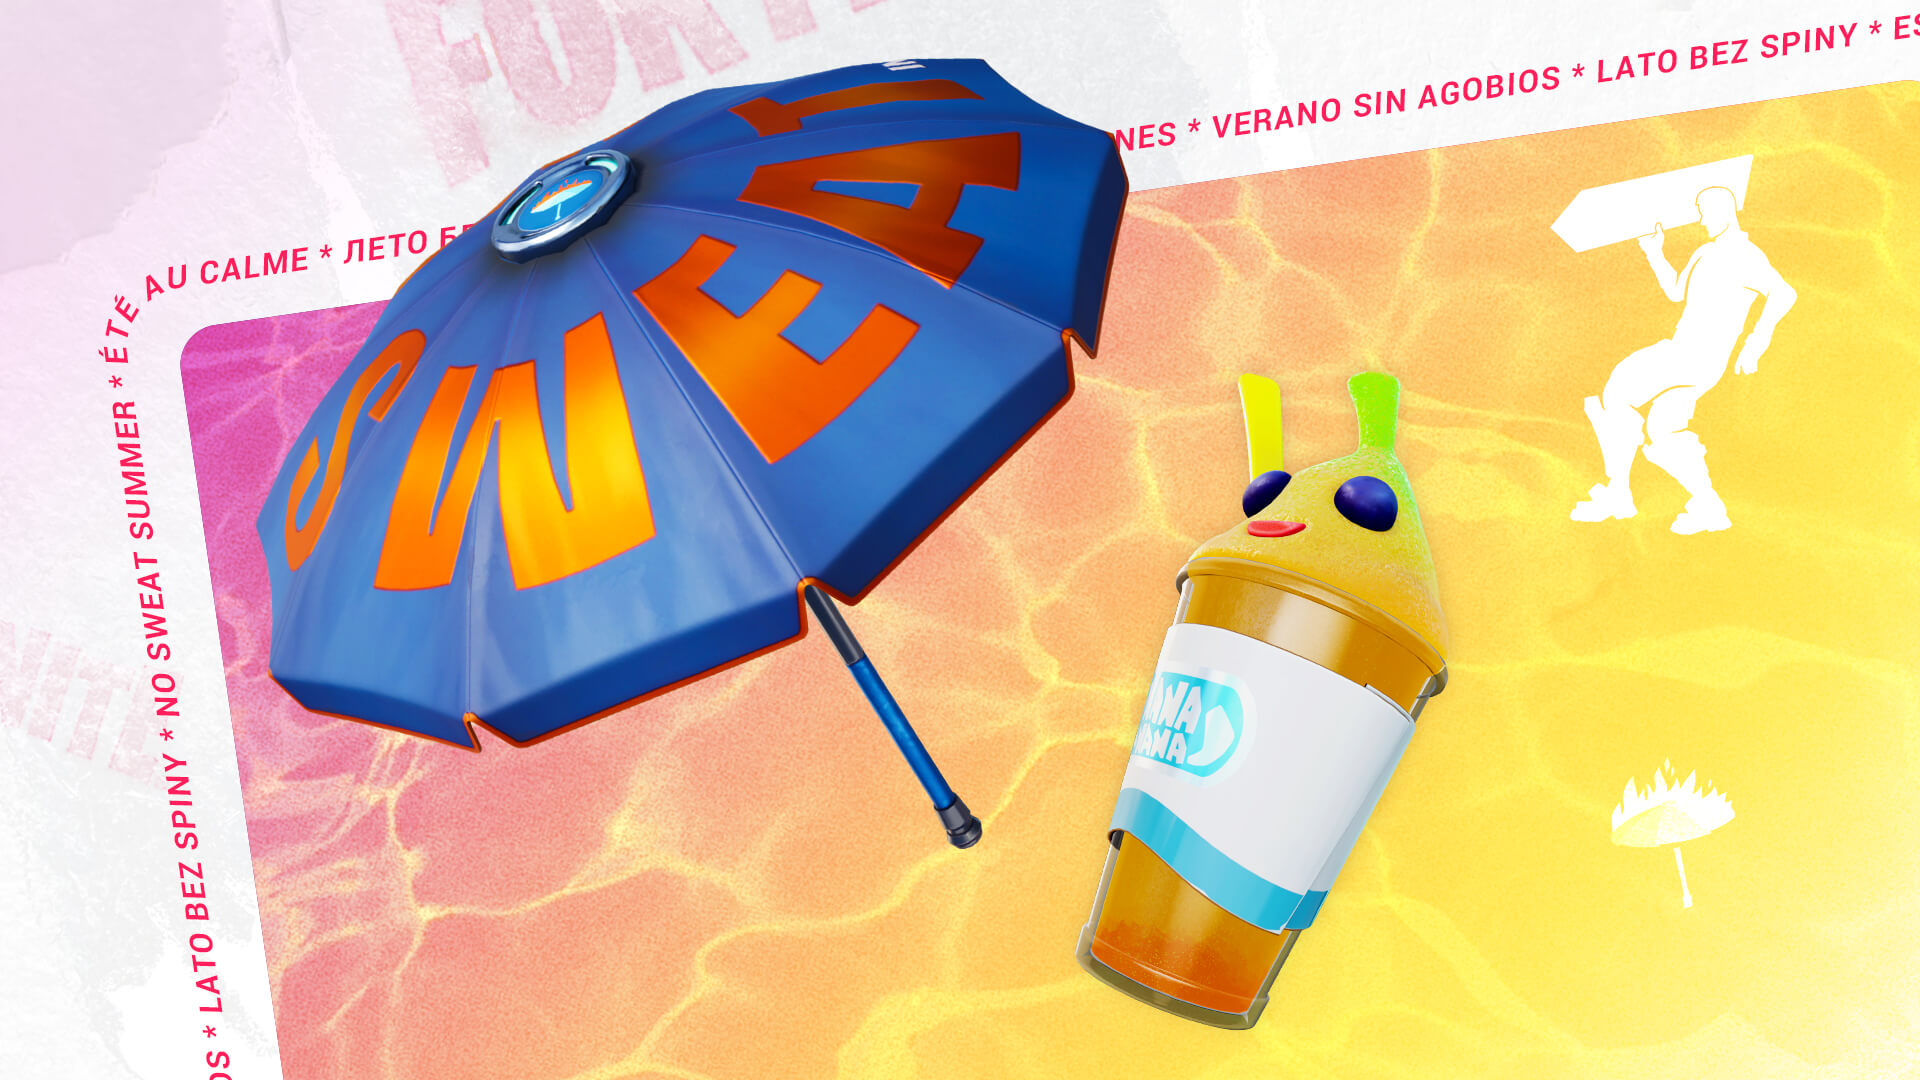 Find out how to participate in the Fortnite Carefree Summer event to earn free rewards by completing new quests.